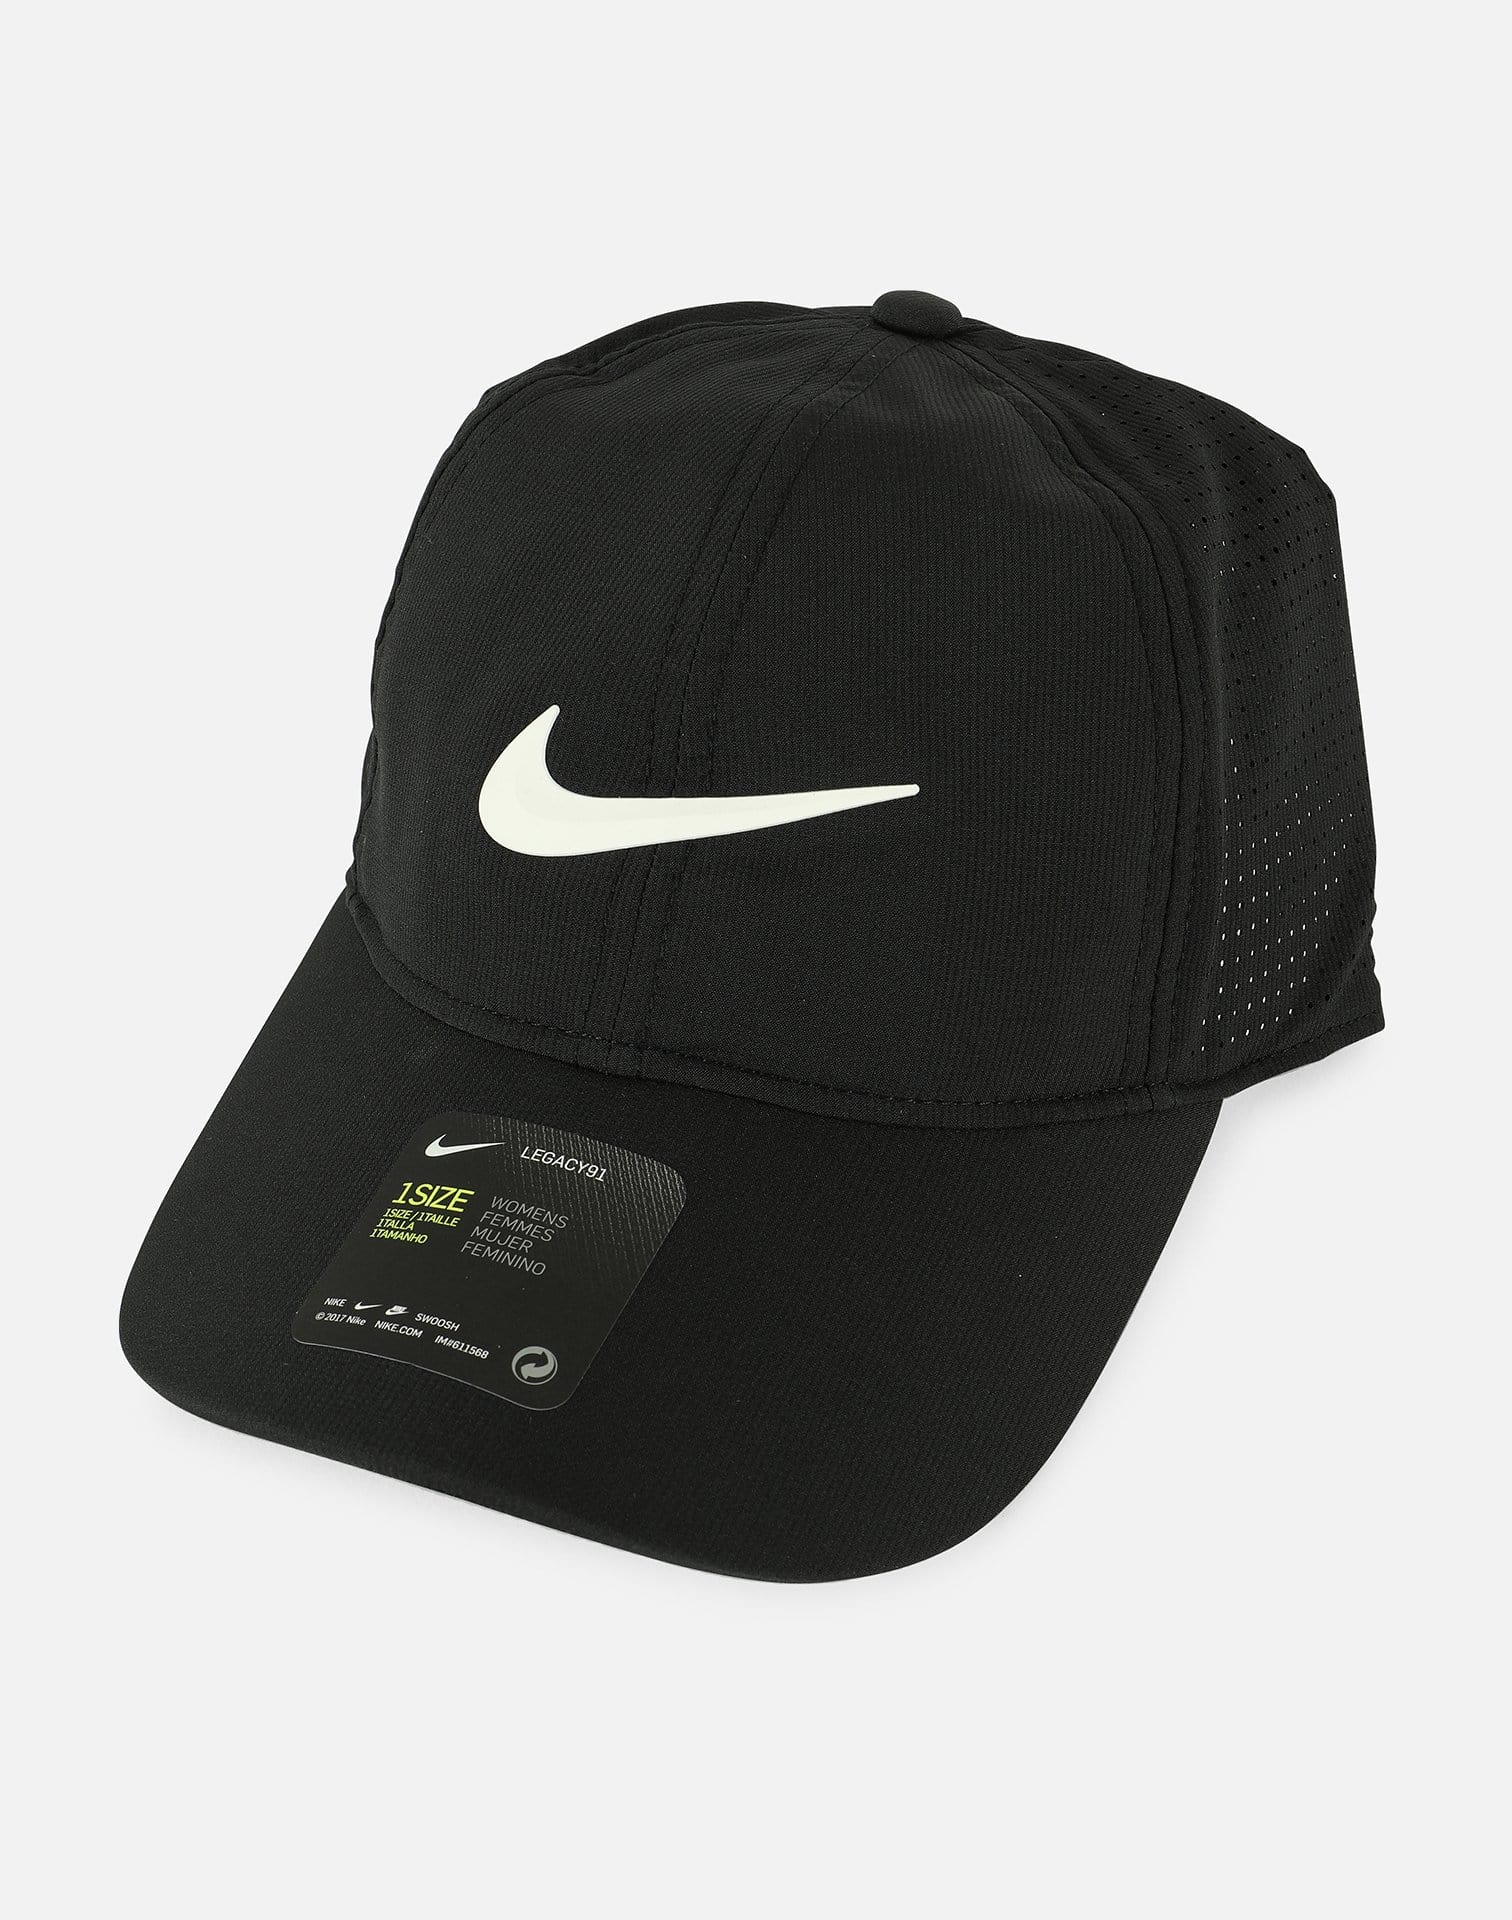 nike men's 2018 aerobill legacy91 perforated golf hat